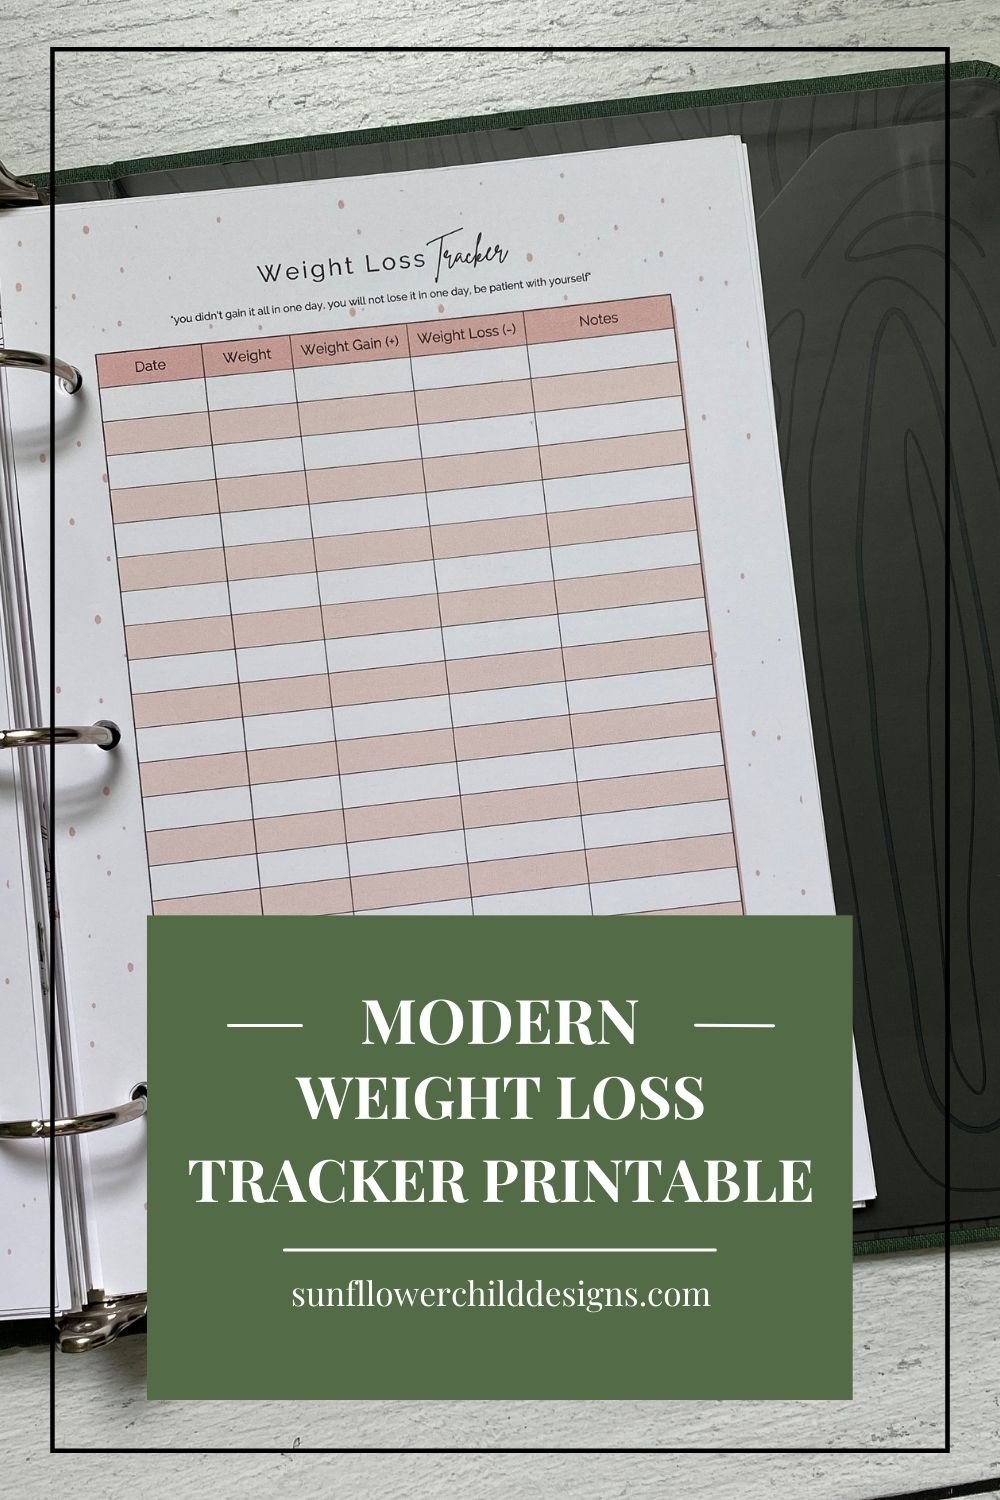 "Unlock Your Fitness Journey with this Chic, Modern Weight Loss Tracker Printable"